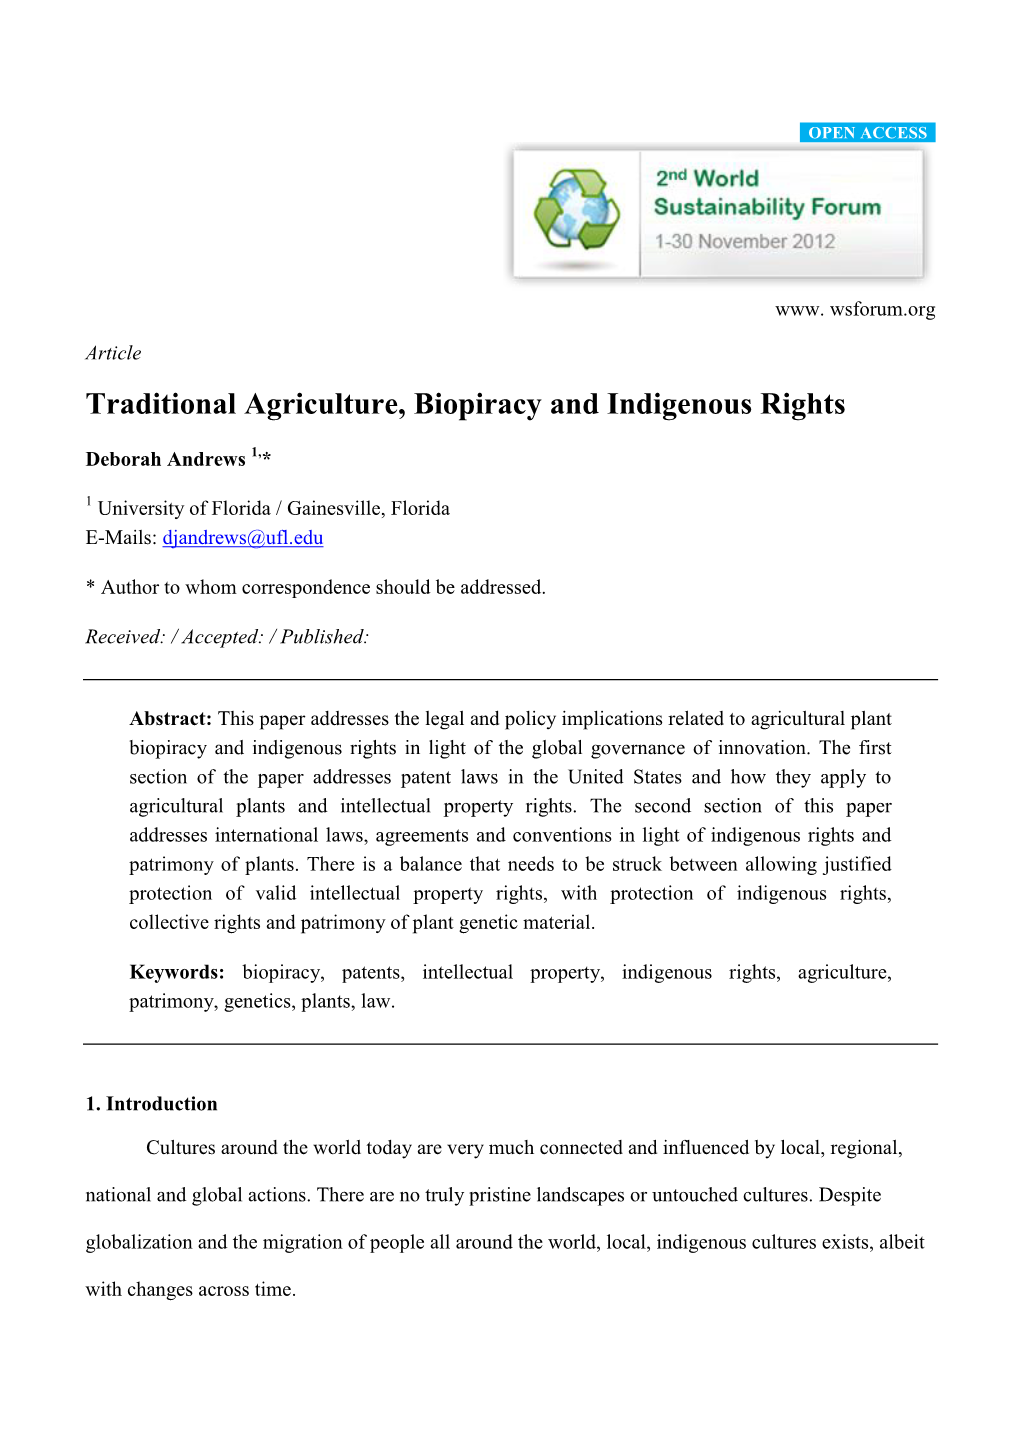 Traditional Agriculture, Biopiracy and Indigenous Rights